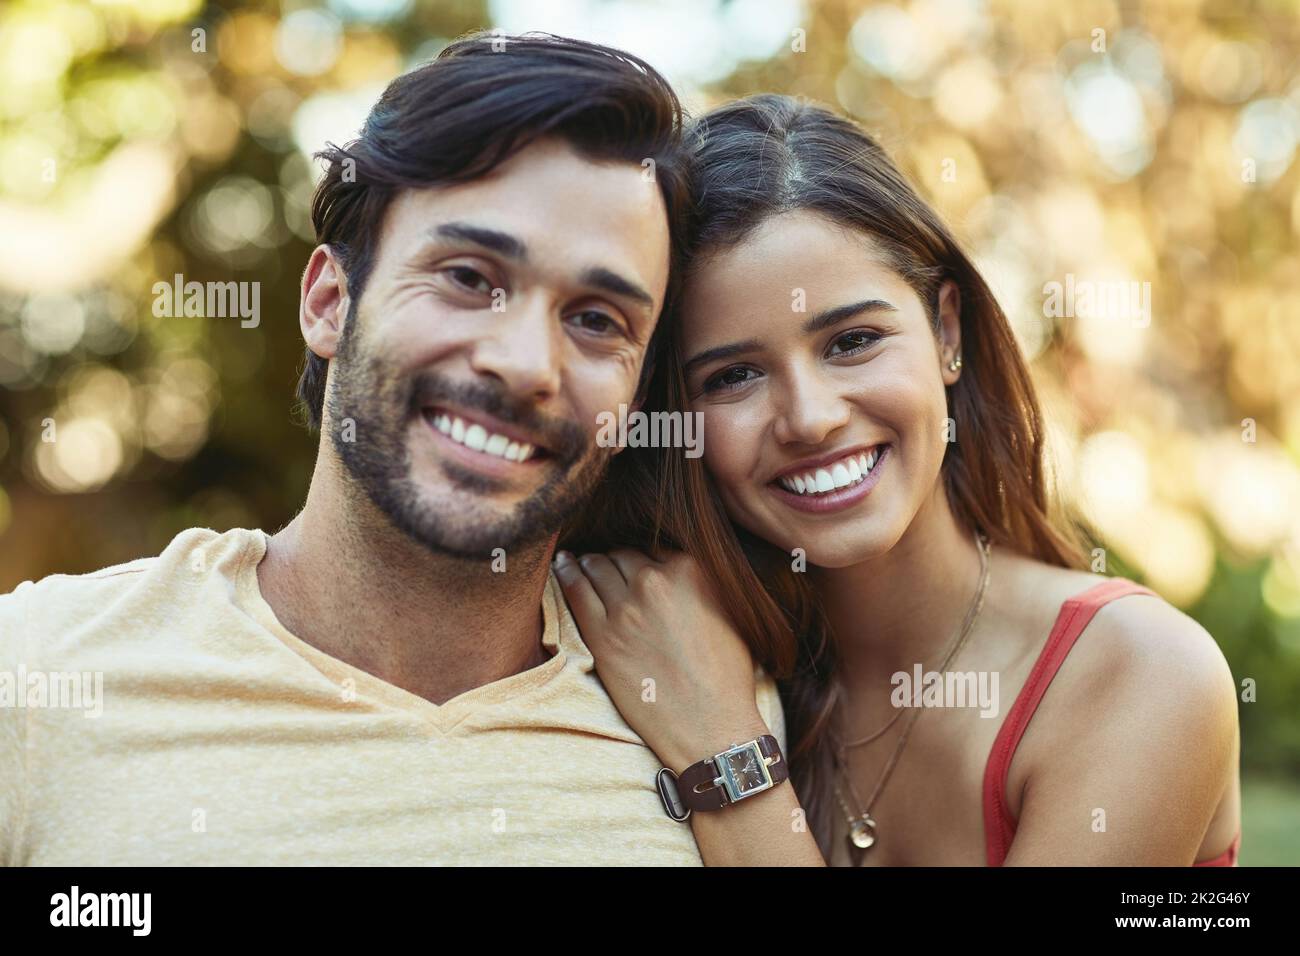 We fall in love again every day. Portrait of a happy young couple posing together outside. Stock Photo